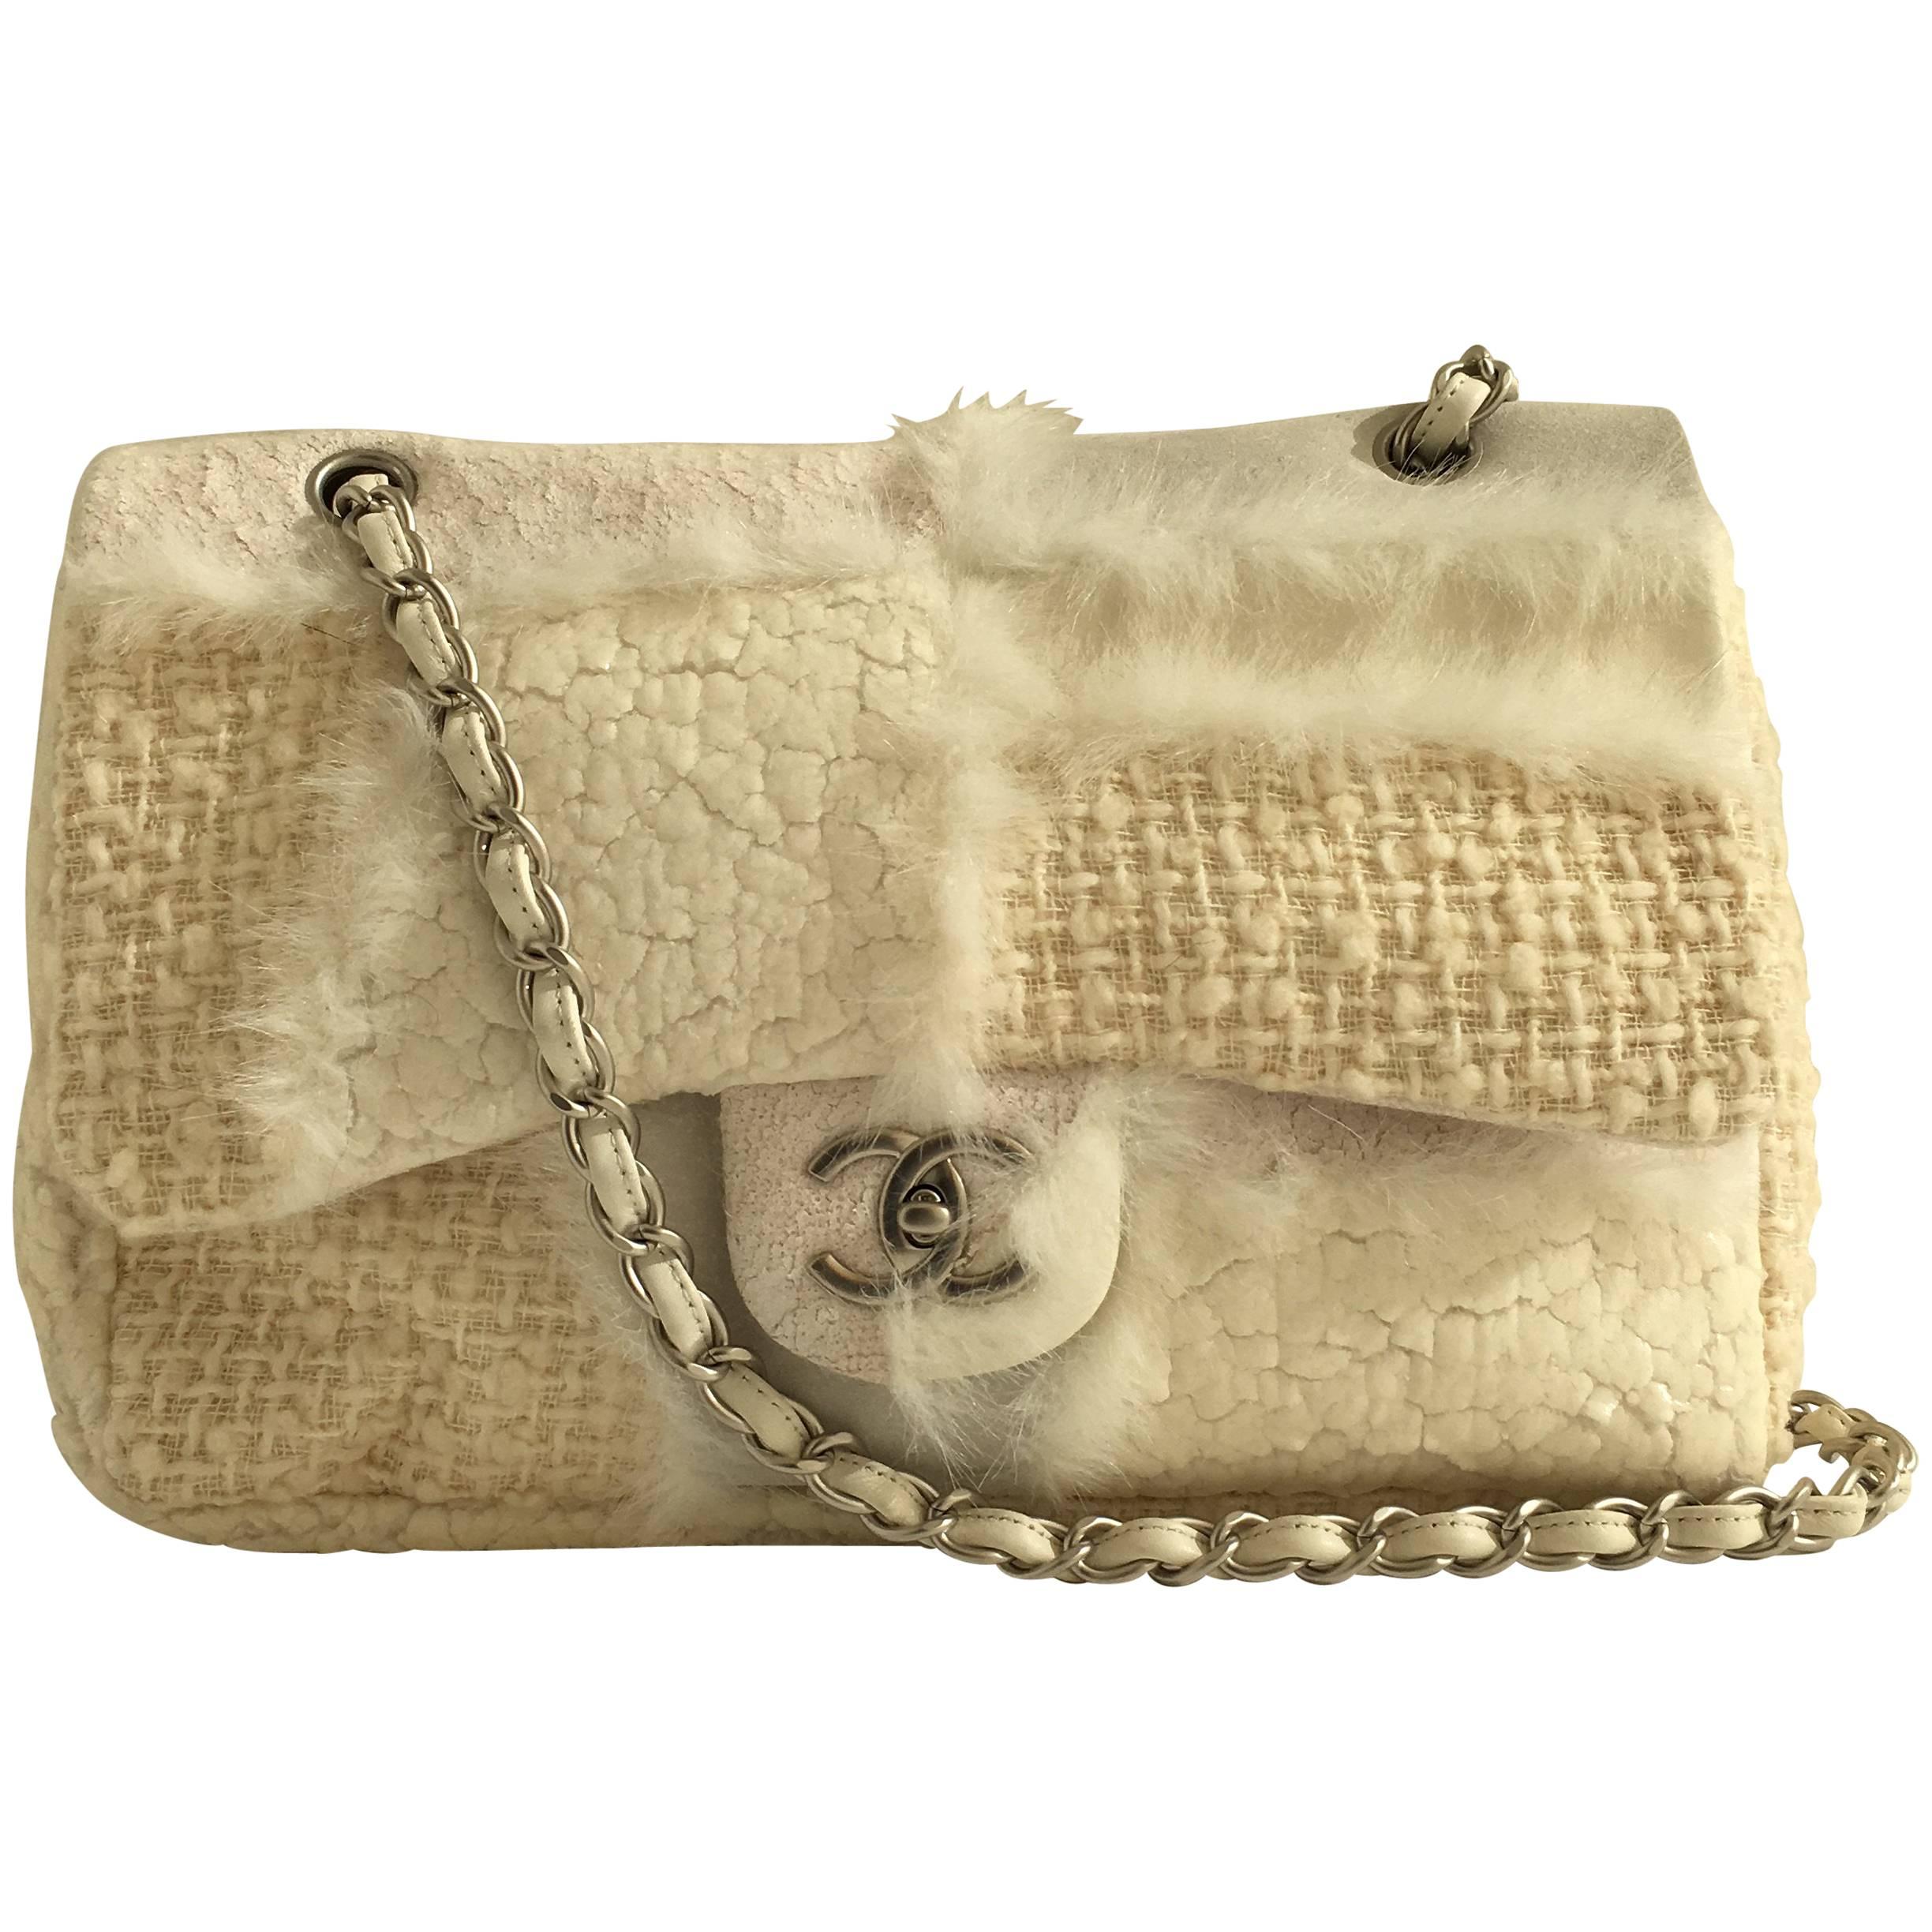 Chanel Classic Flap Cream Bag in Multimedia Patchwork With Faux Fur Accents